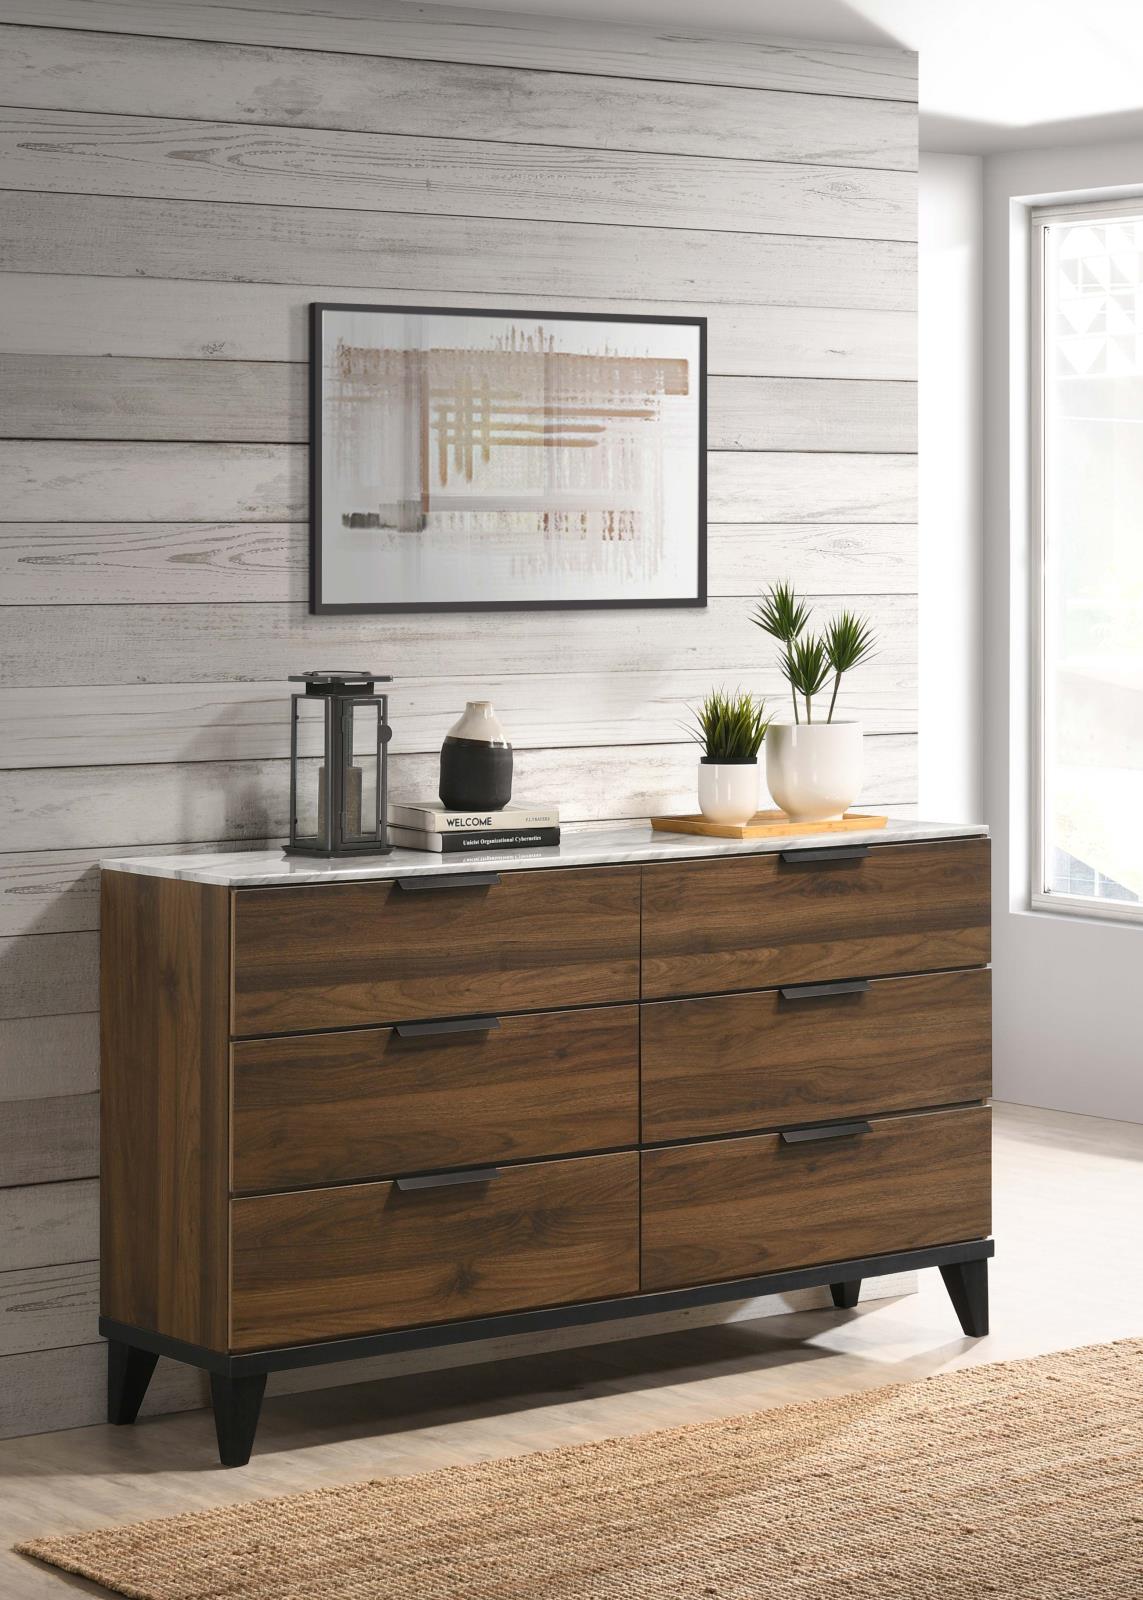 Coaster Louis Philippe 203963+203964 6 Drawer Dresser and Vertical